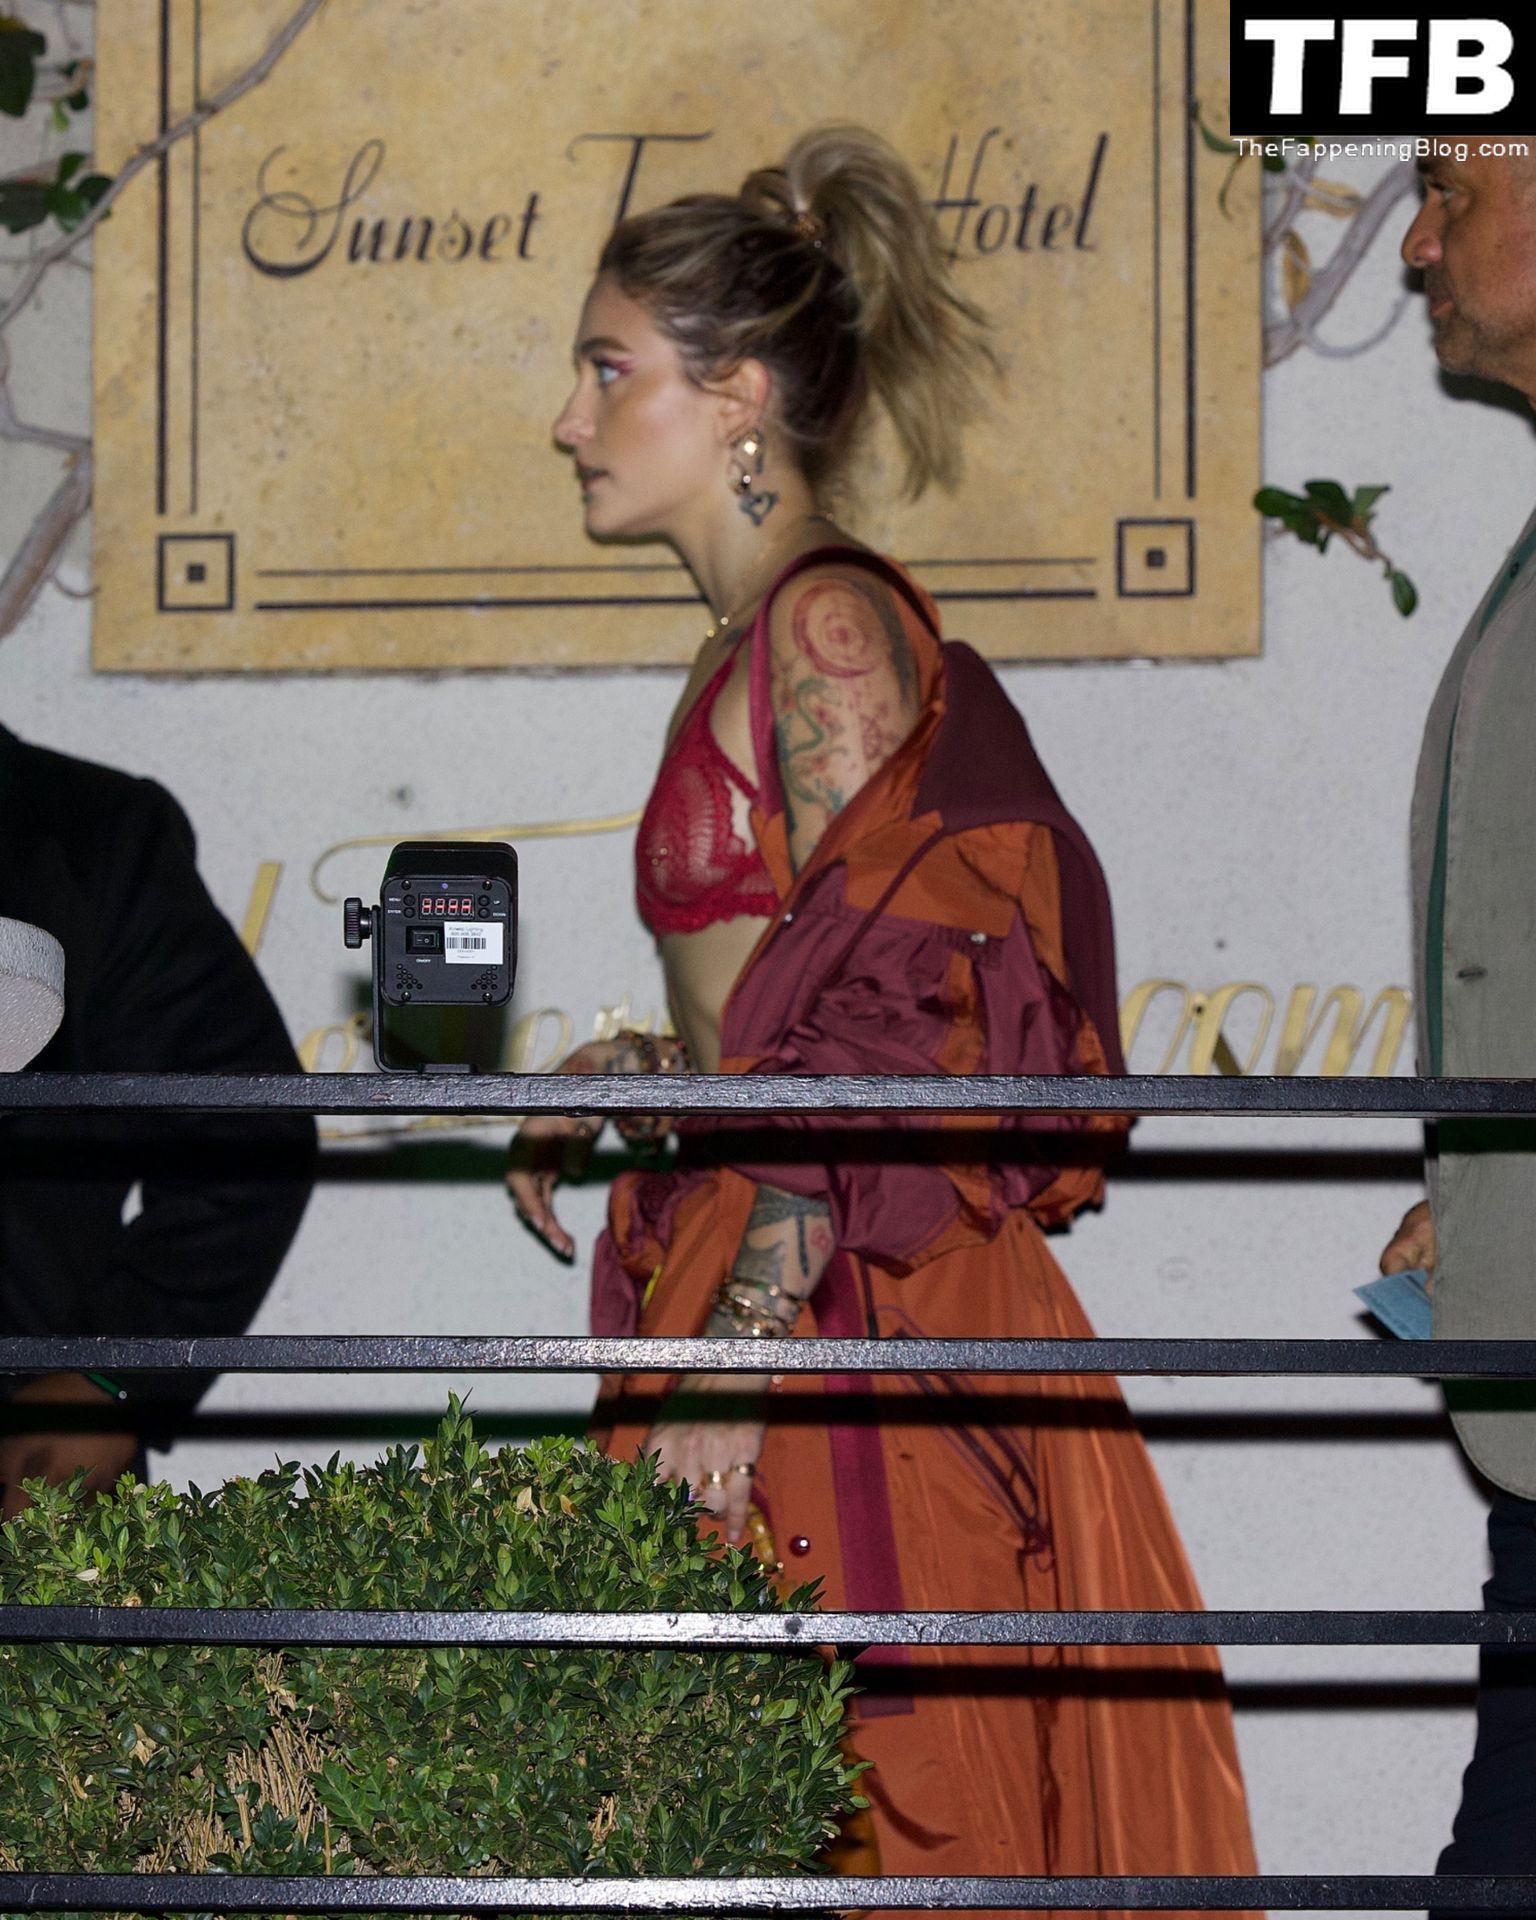 Paris Jackson See Through Nudity The Fappening Blog 23 - Paris Jackson Flashes Her Nude Tits Wearing a See-Through Bra in WeHo (34 Photos)